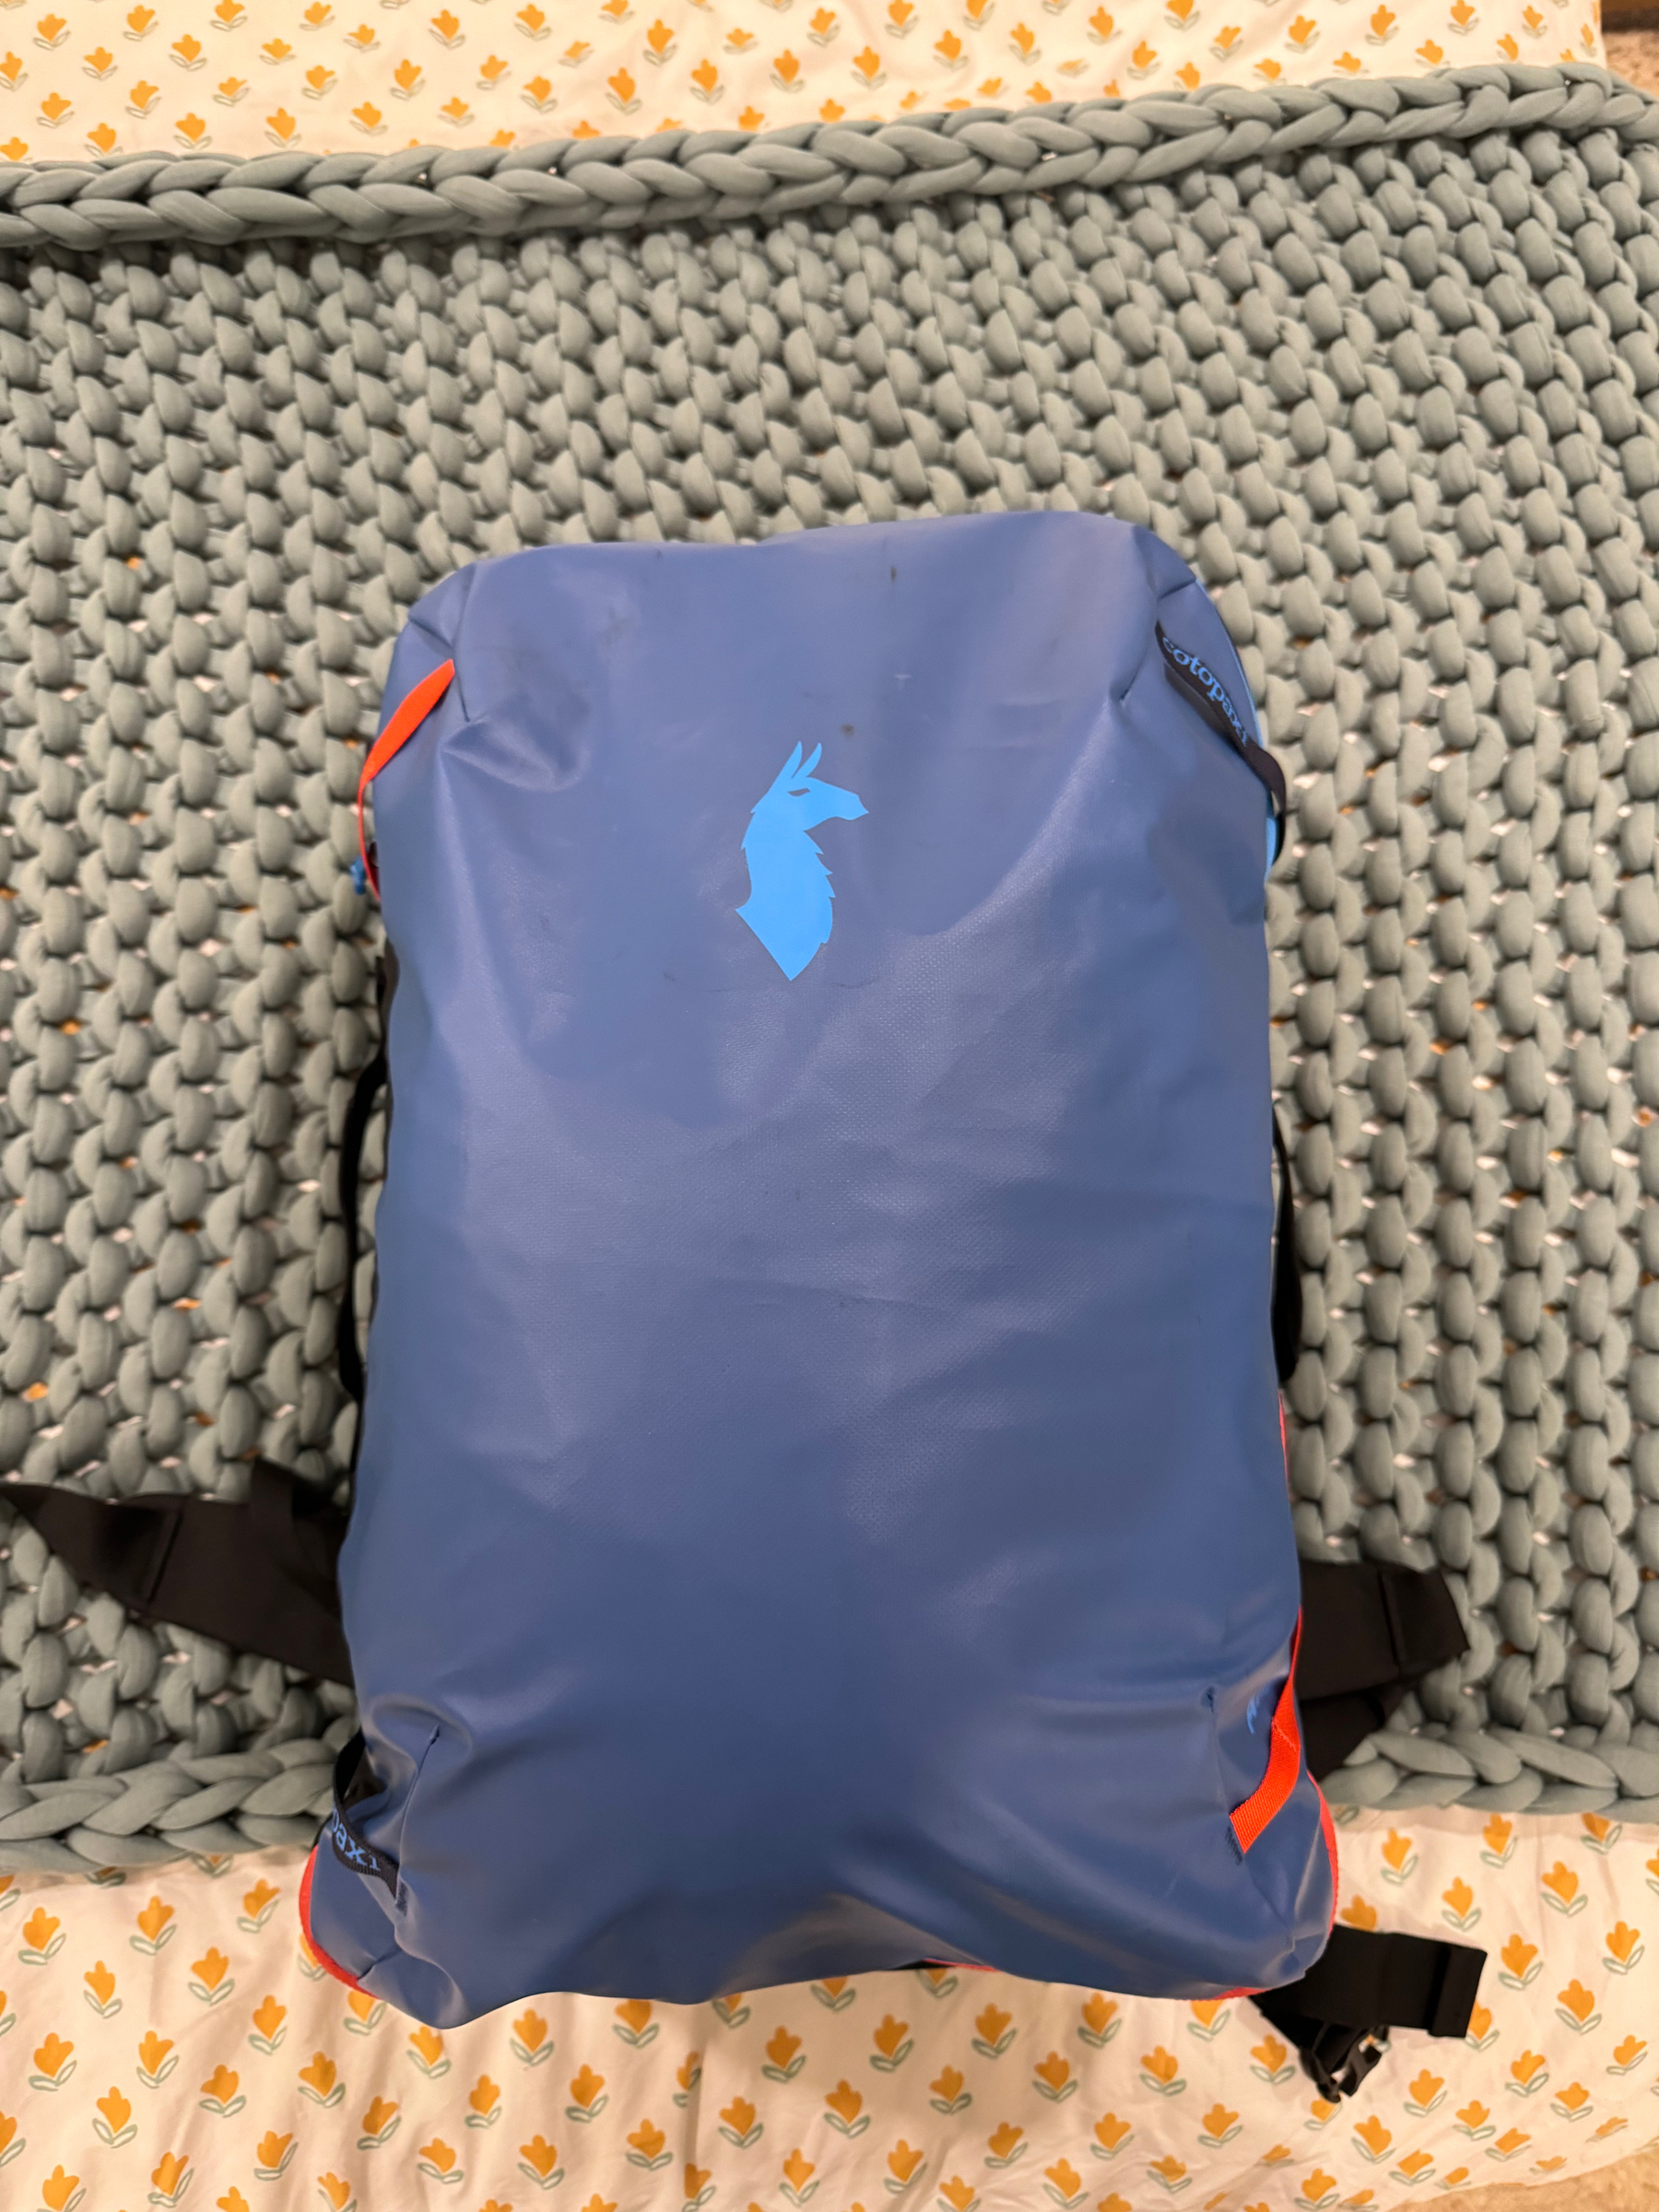 A blue travel backpack with a silhouette of an alpaca on it, placed on a gray knitted blanket over a patterned sheet.